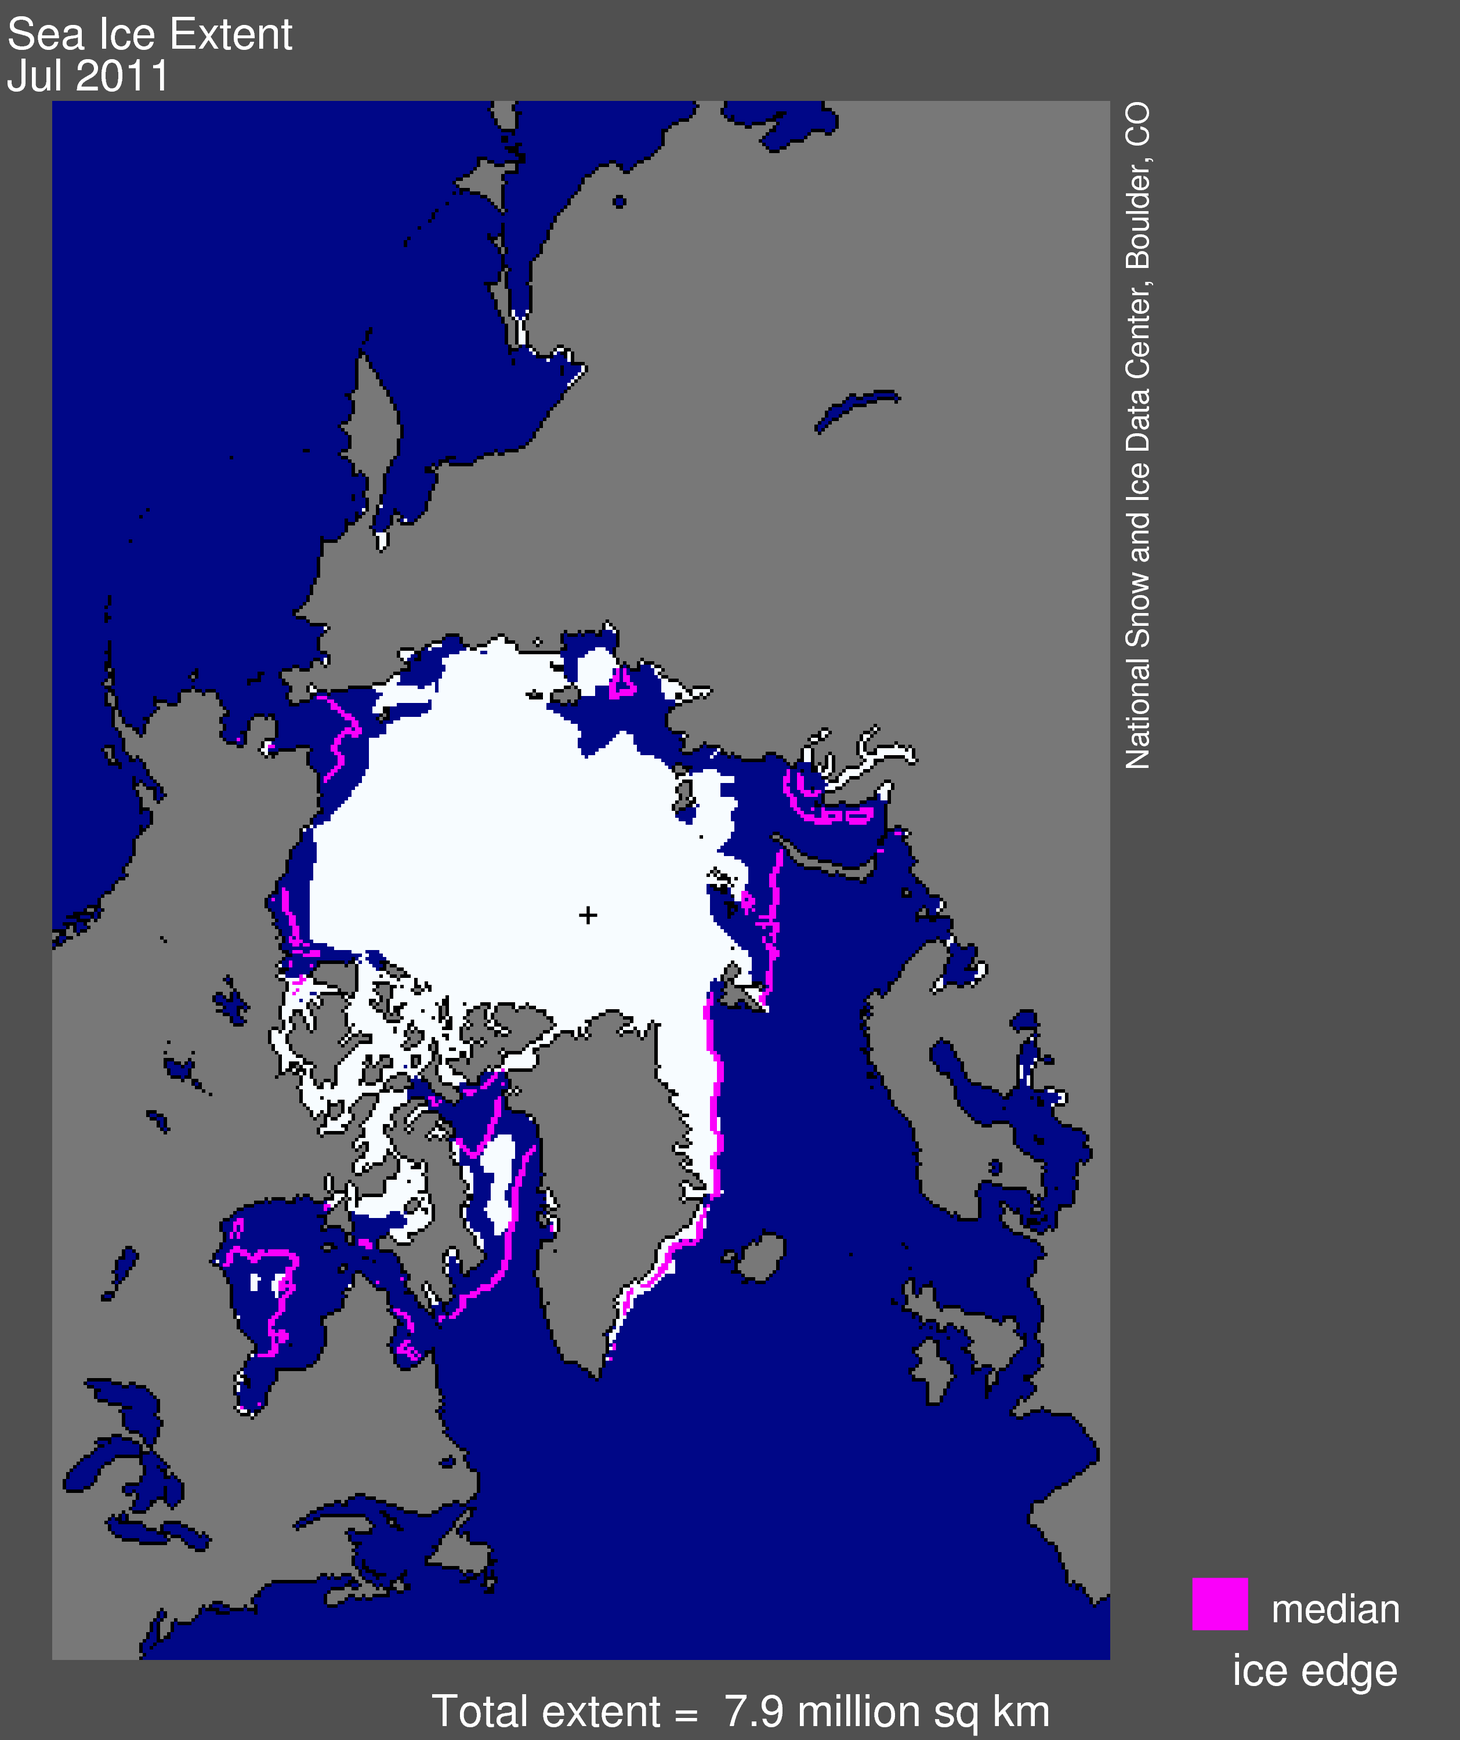 Sea Ice Extent in July 2011